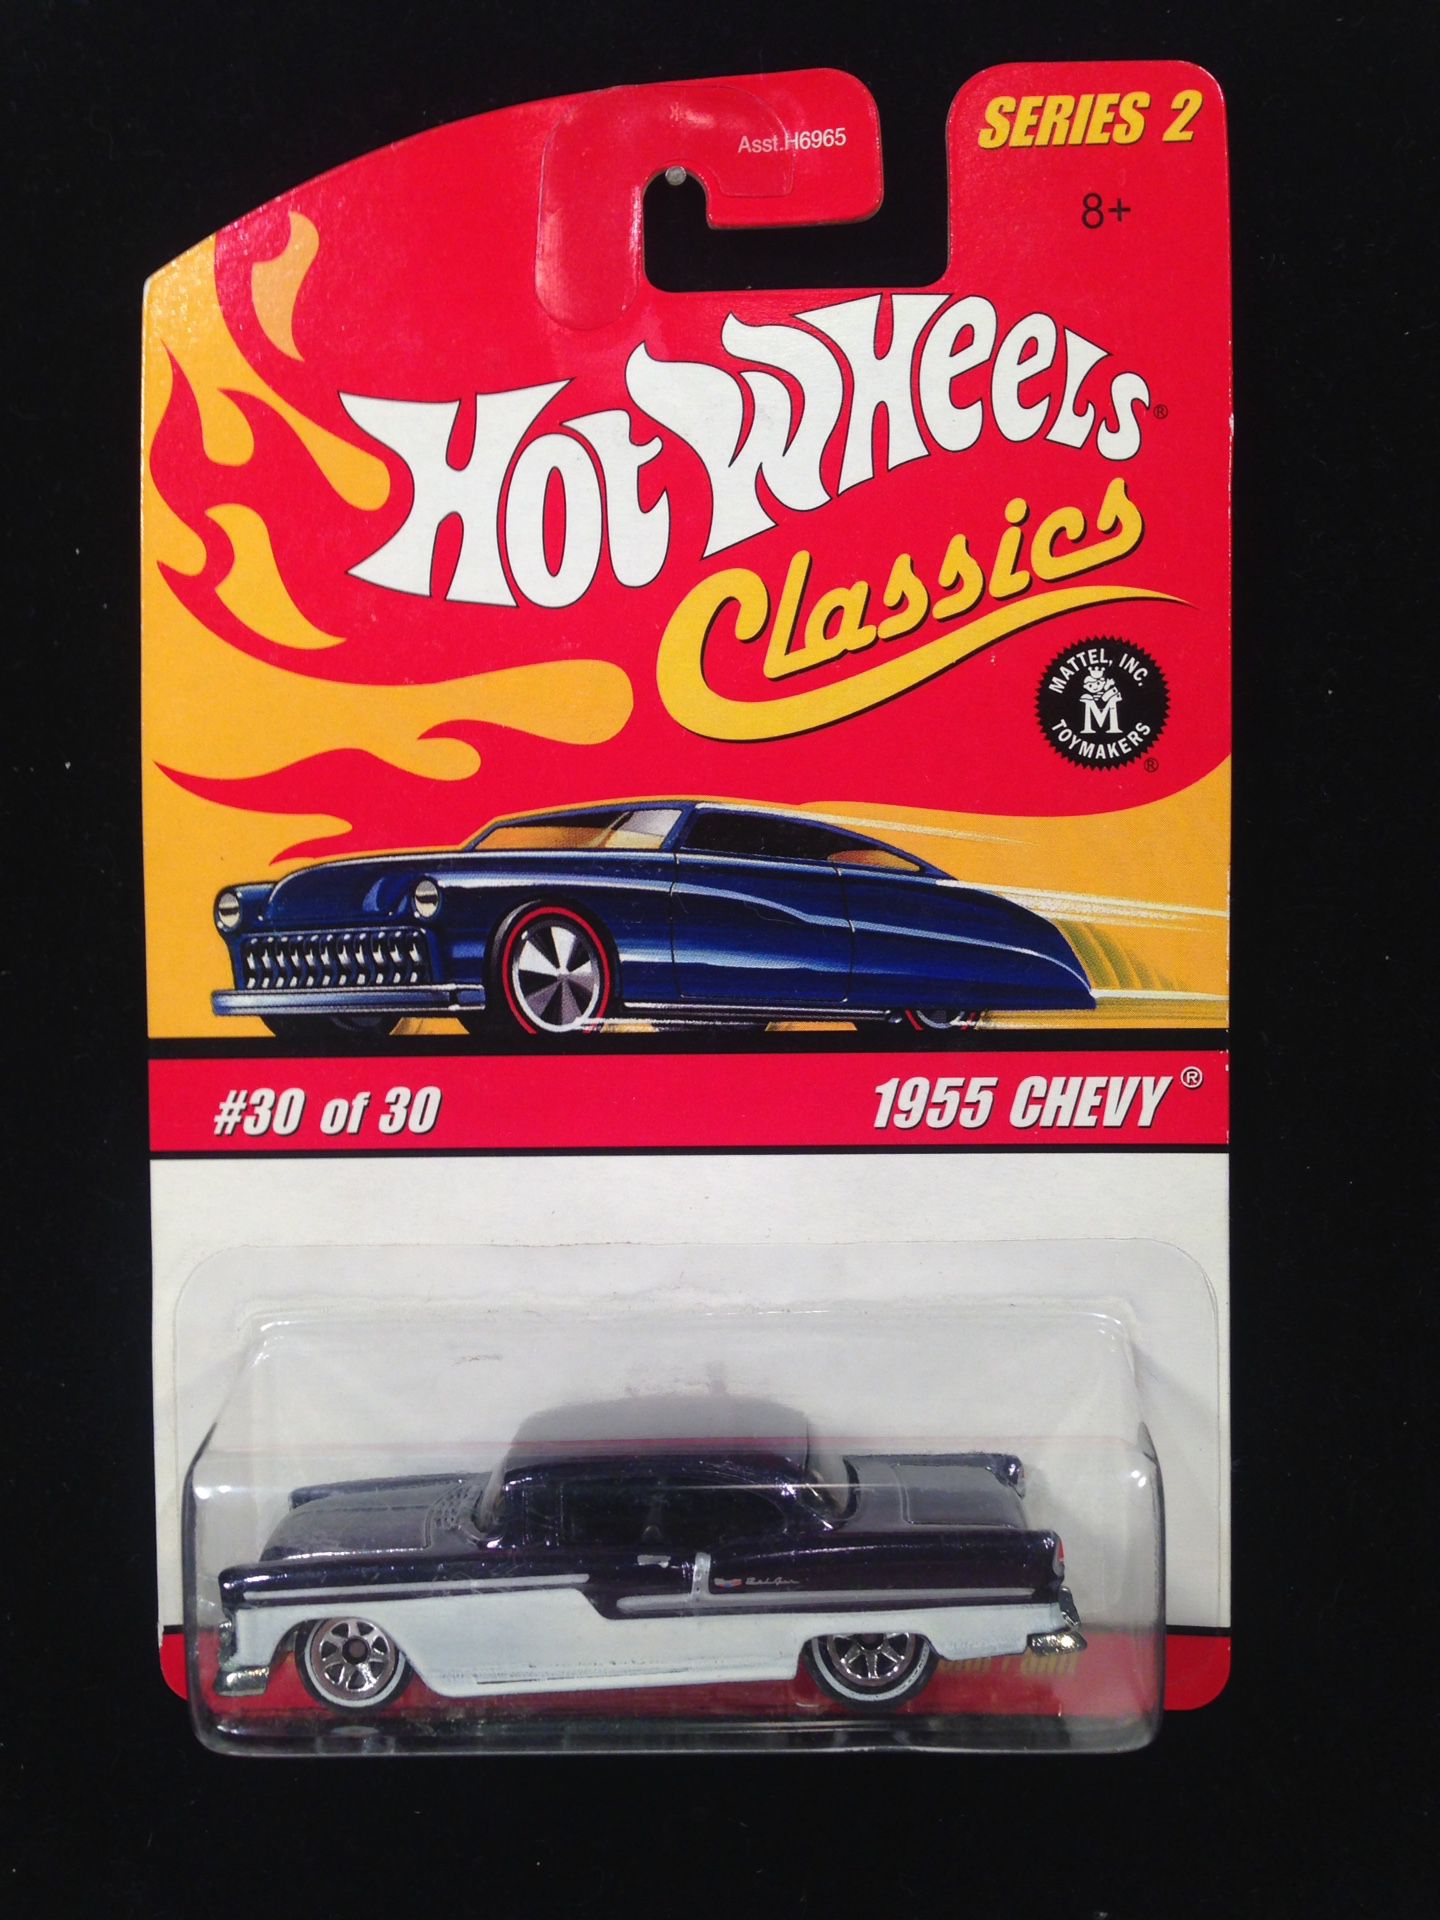 Hot Wheels Classics Series 2 1955 Chevy • Production Error • Reversed In Blister